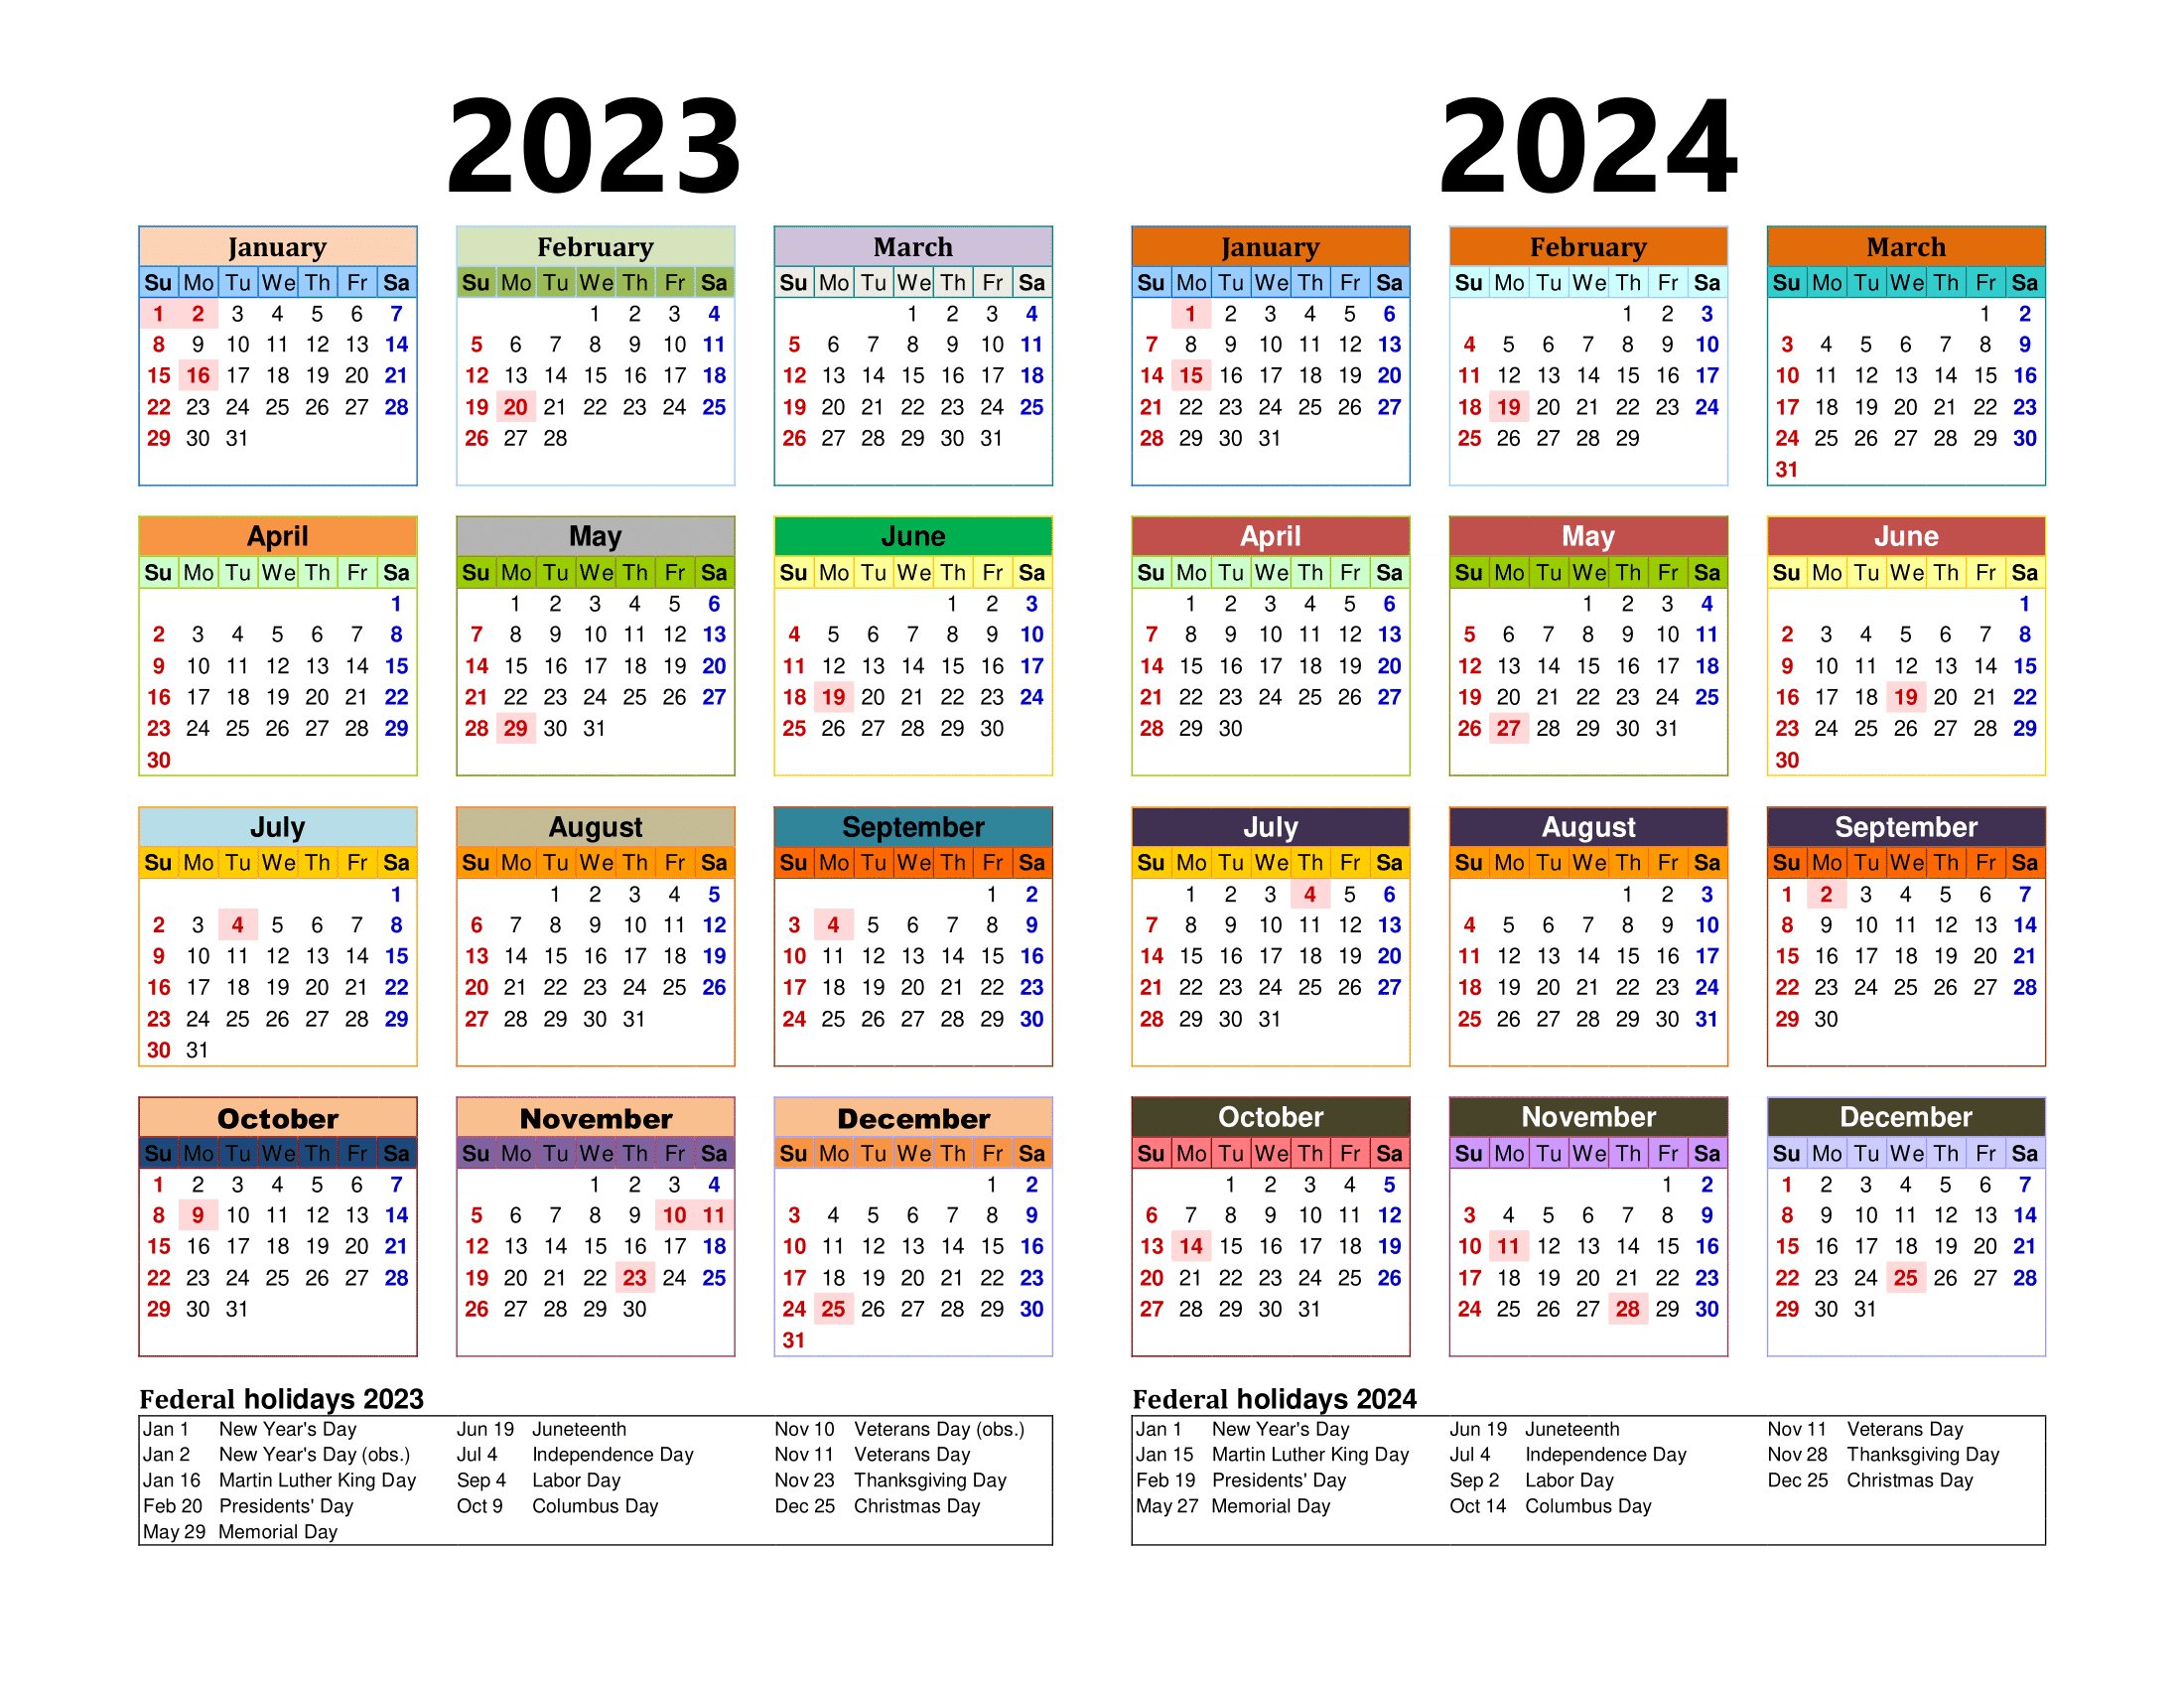 Free Printable Two Year Calendar Templates For 2023 And 2024 In Pdf | Yearly Calendar 2023 And 2024 Printable Free